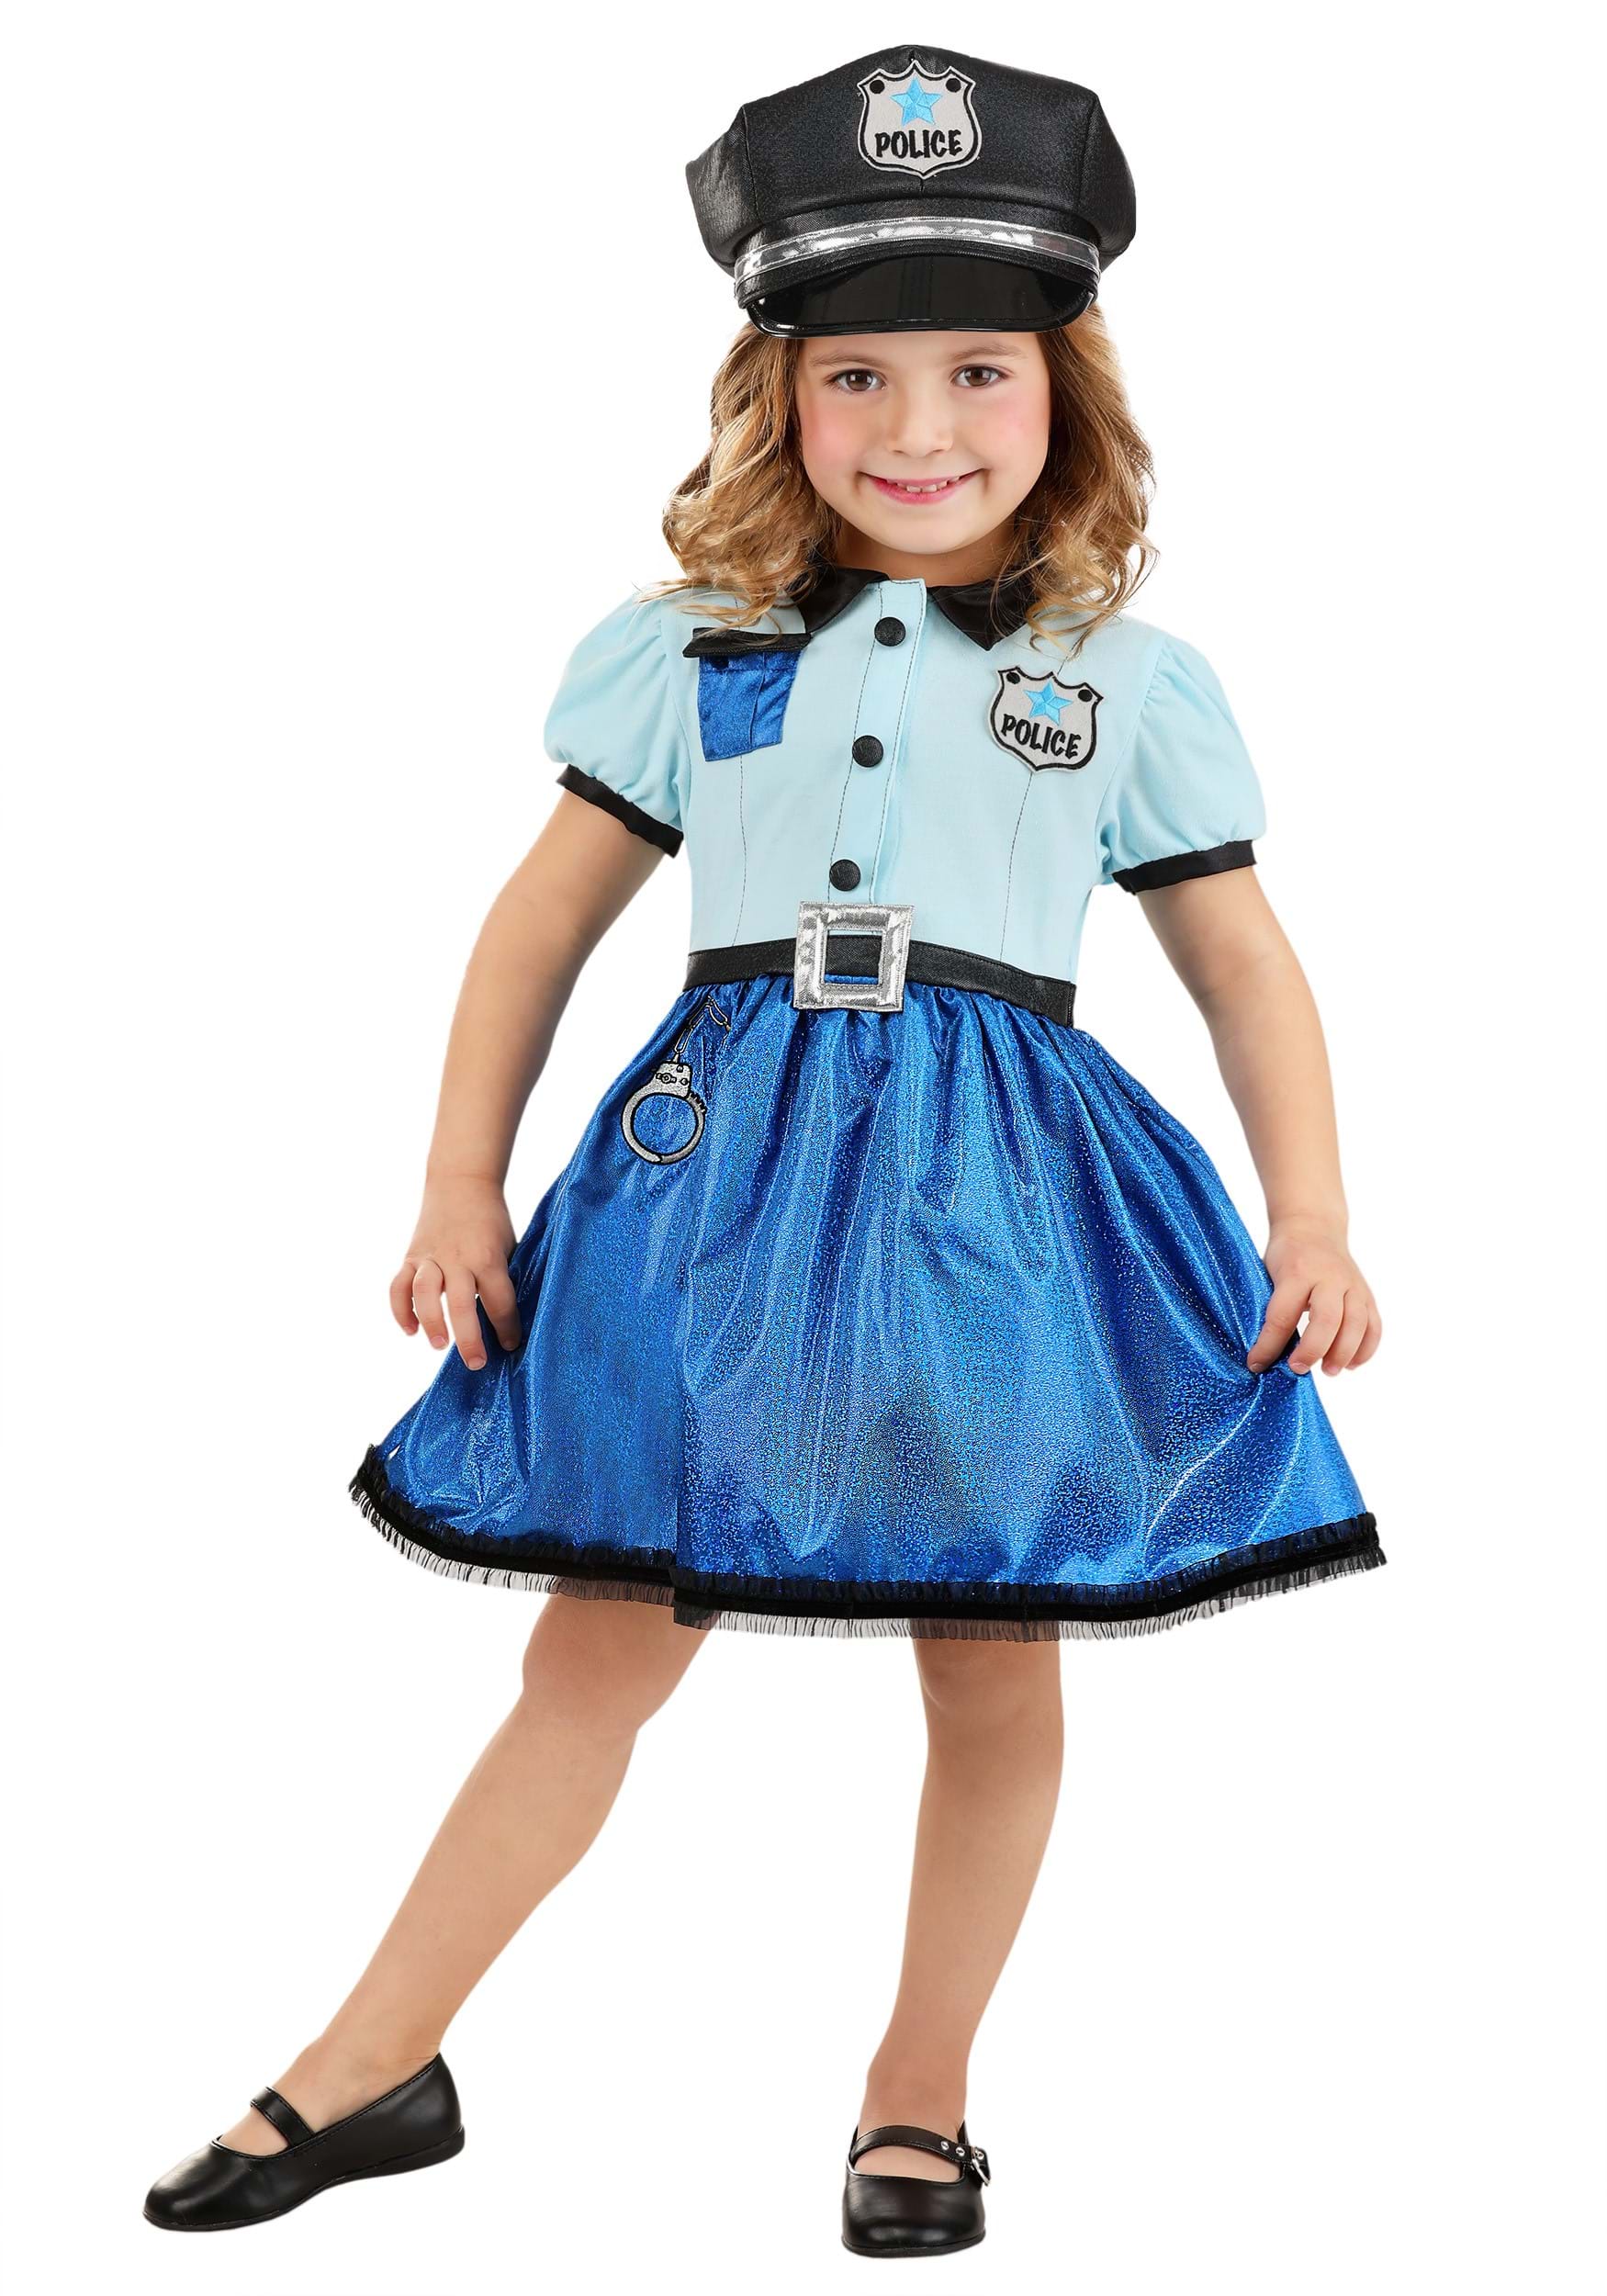 https://images.halloweencostumes.com/products/88779/1-1/toddler-cutie-cop-costume.jpg